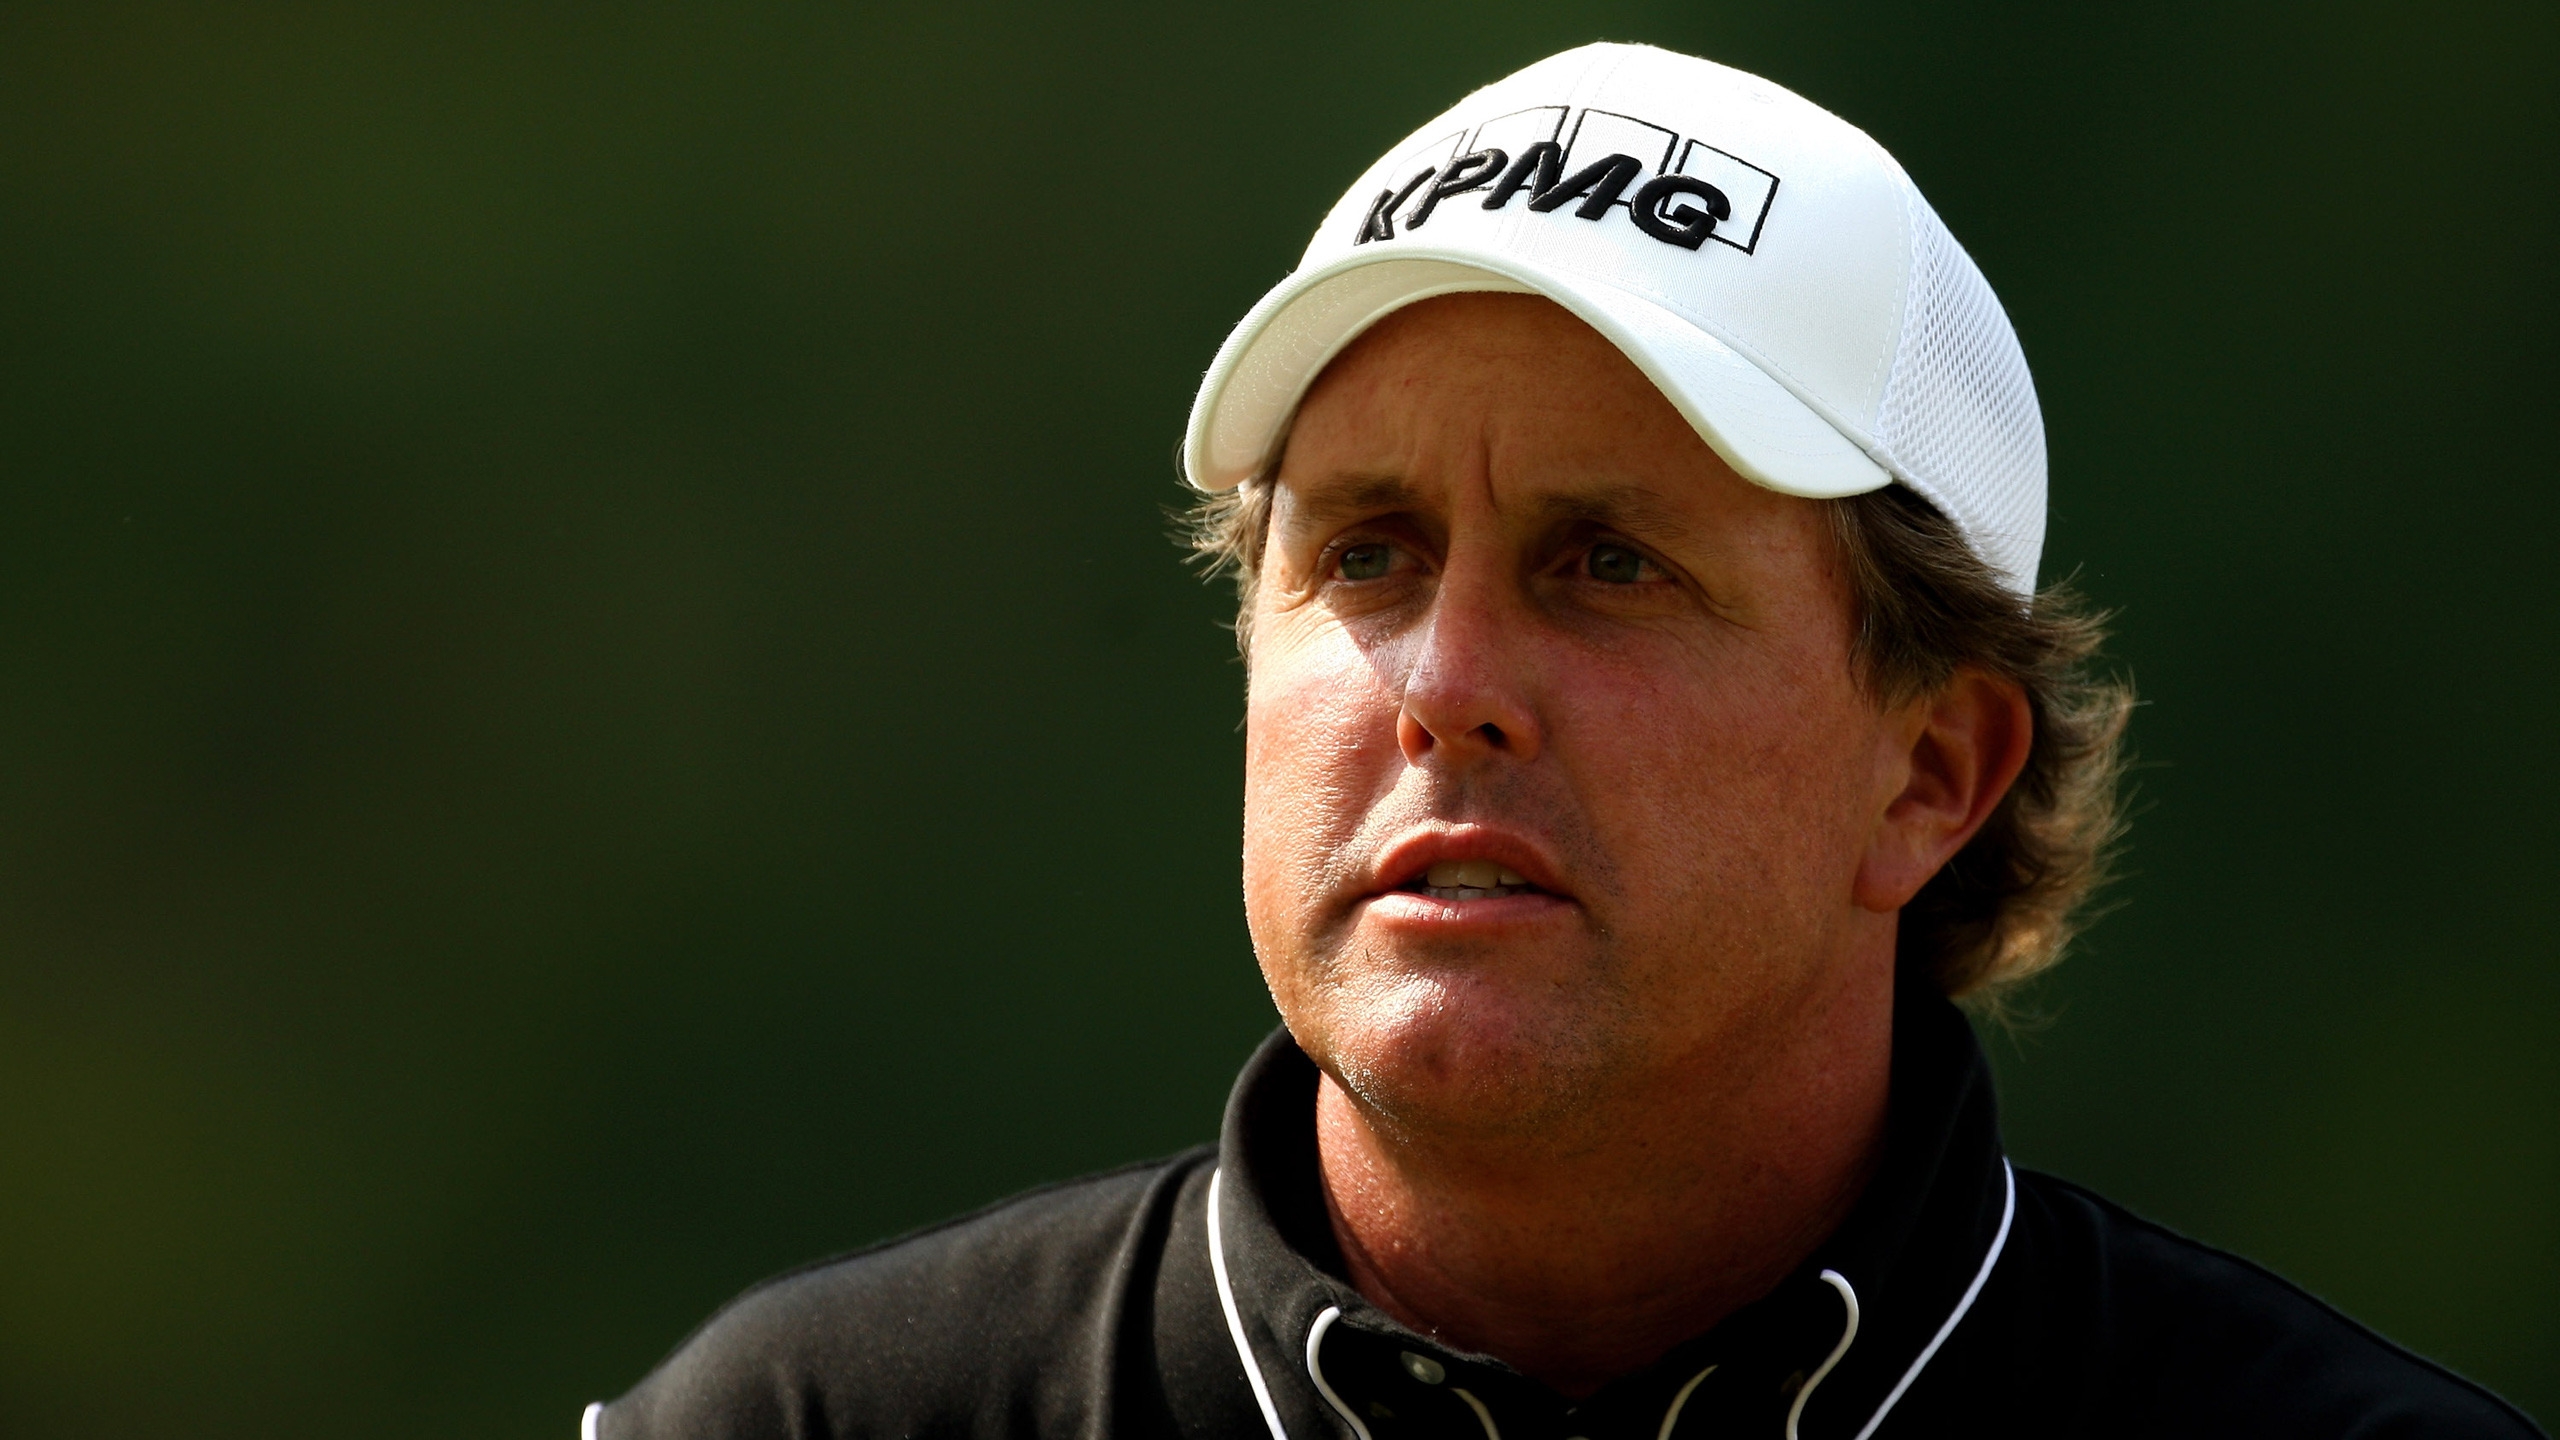 Philip Mickelson for 2560x1440 HDTV resolution